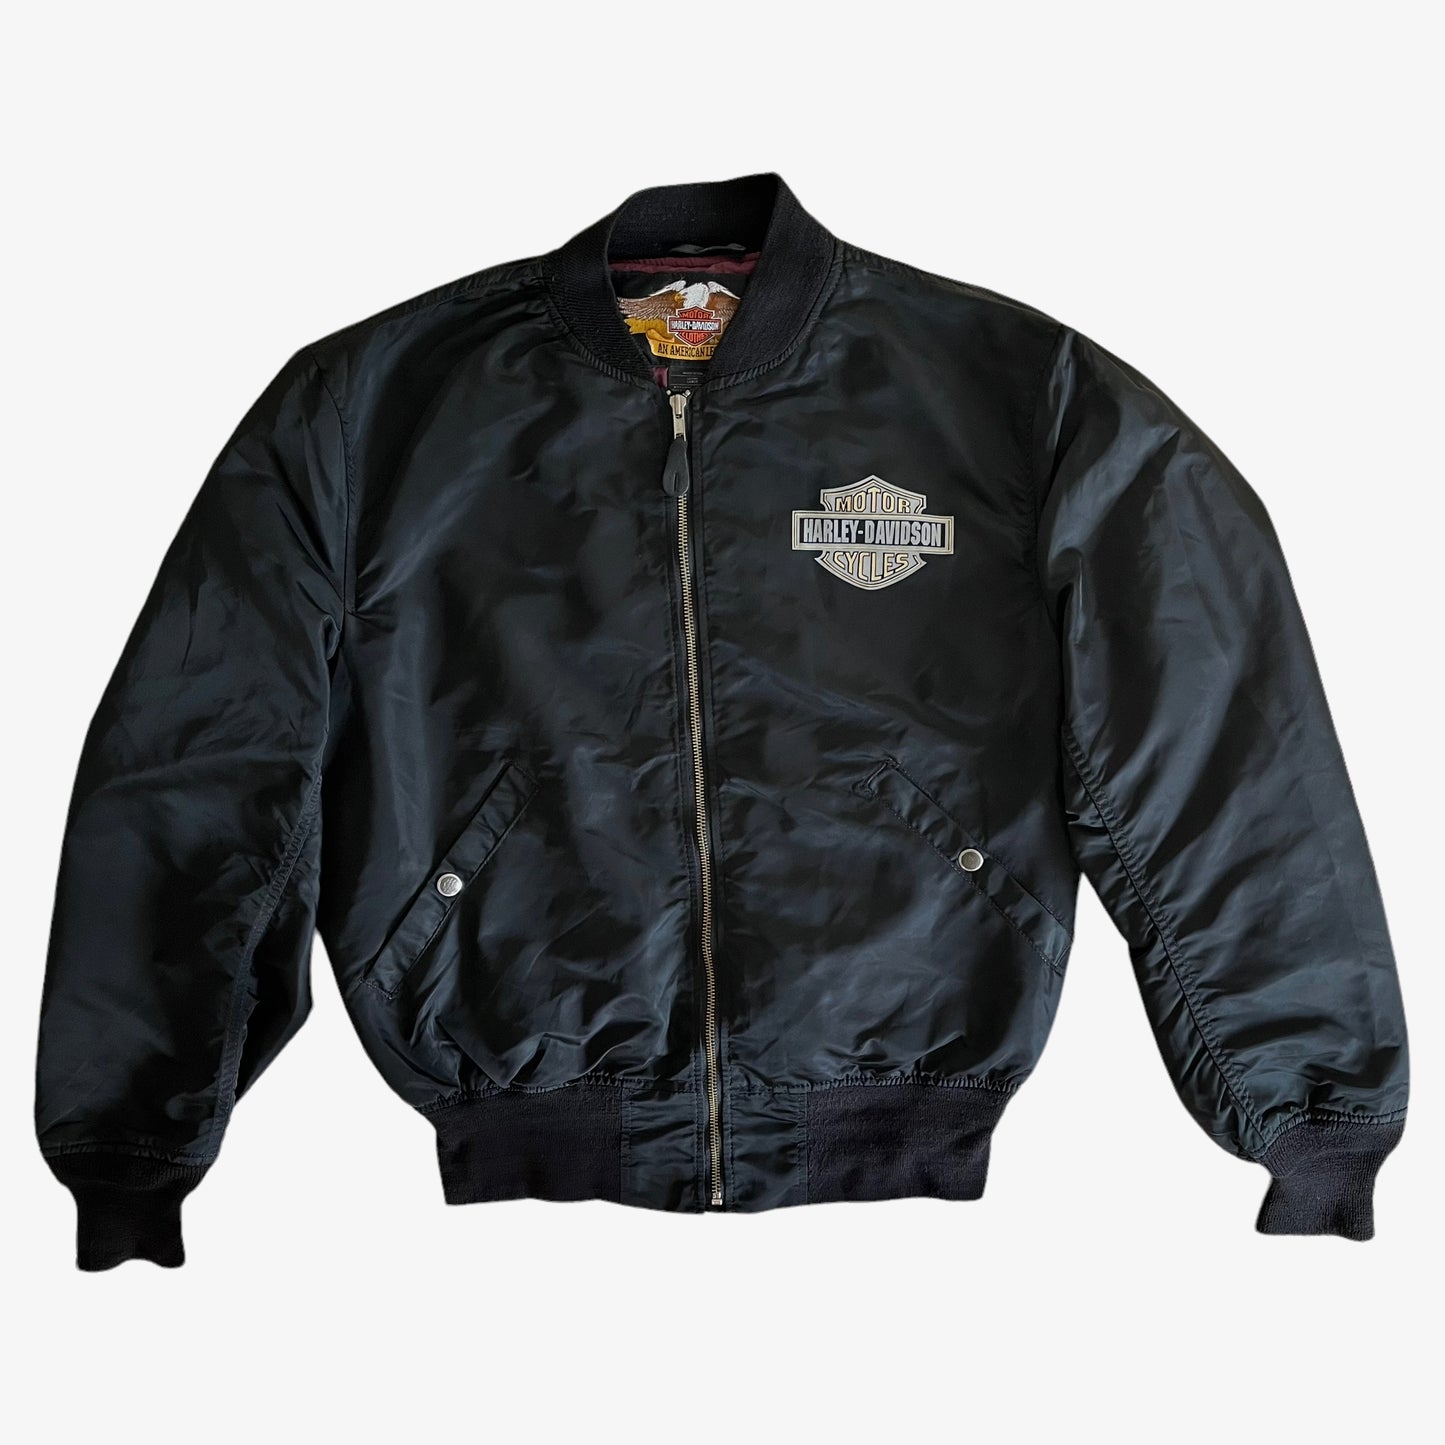 Vintage 1998 Harley Davidson 95th Anniversary Bomber Jacket With Back Spell Out - Casspios Dream